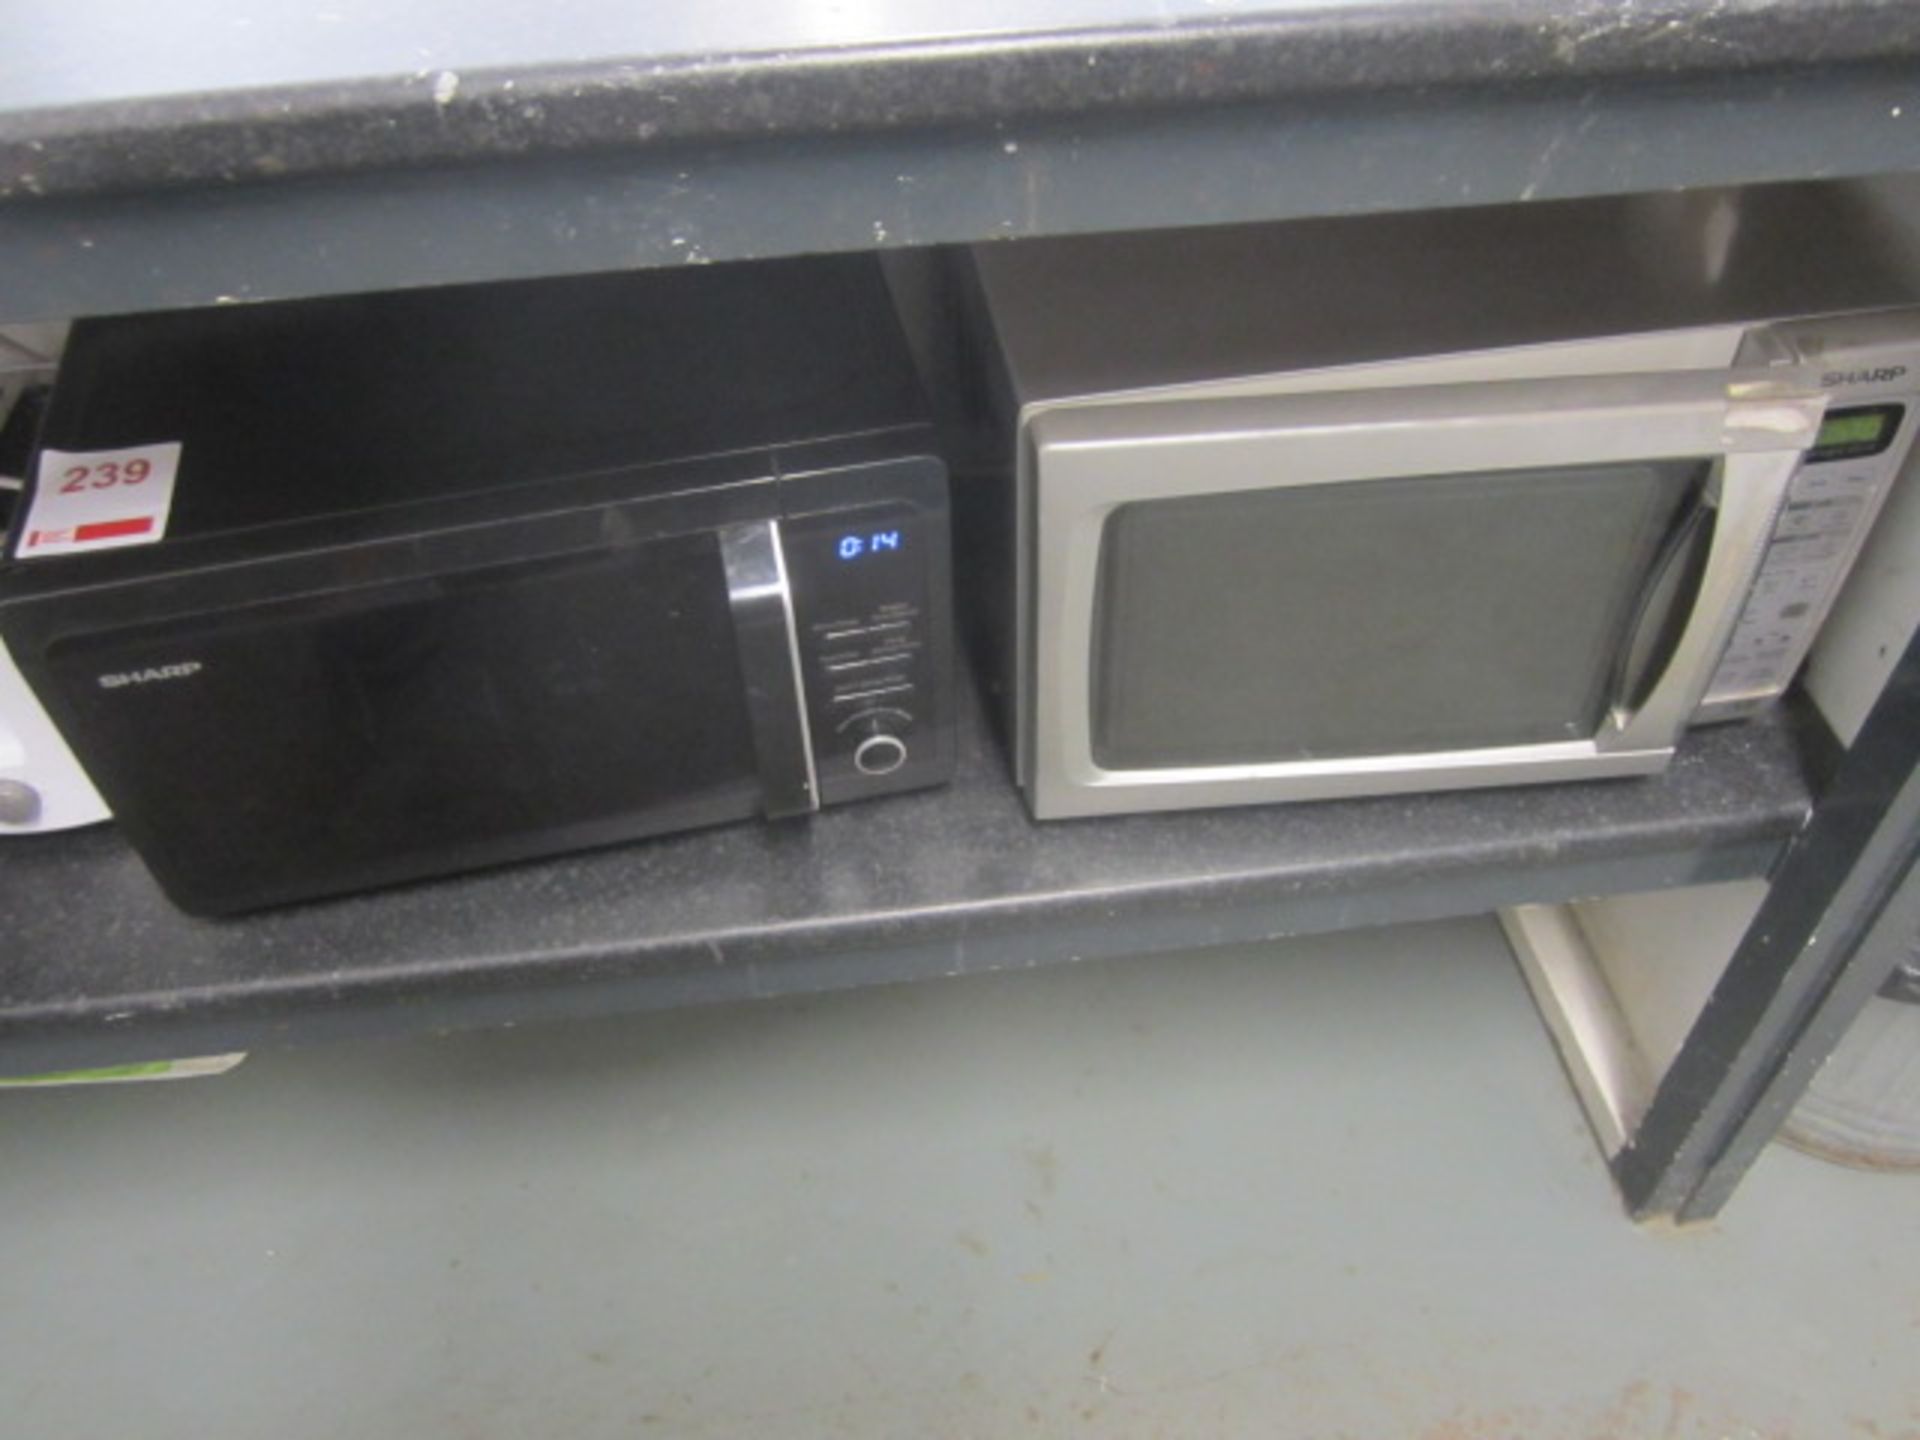 Two Sharp microwave ovens